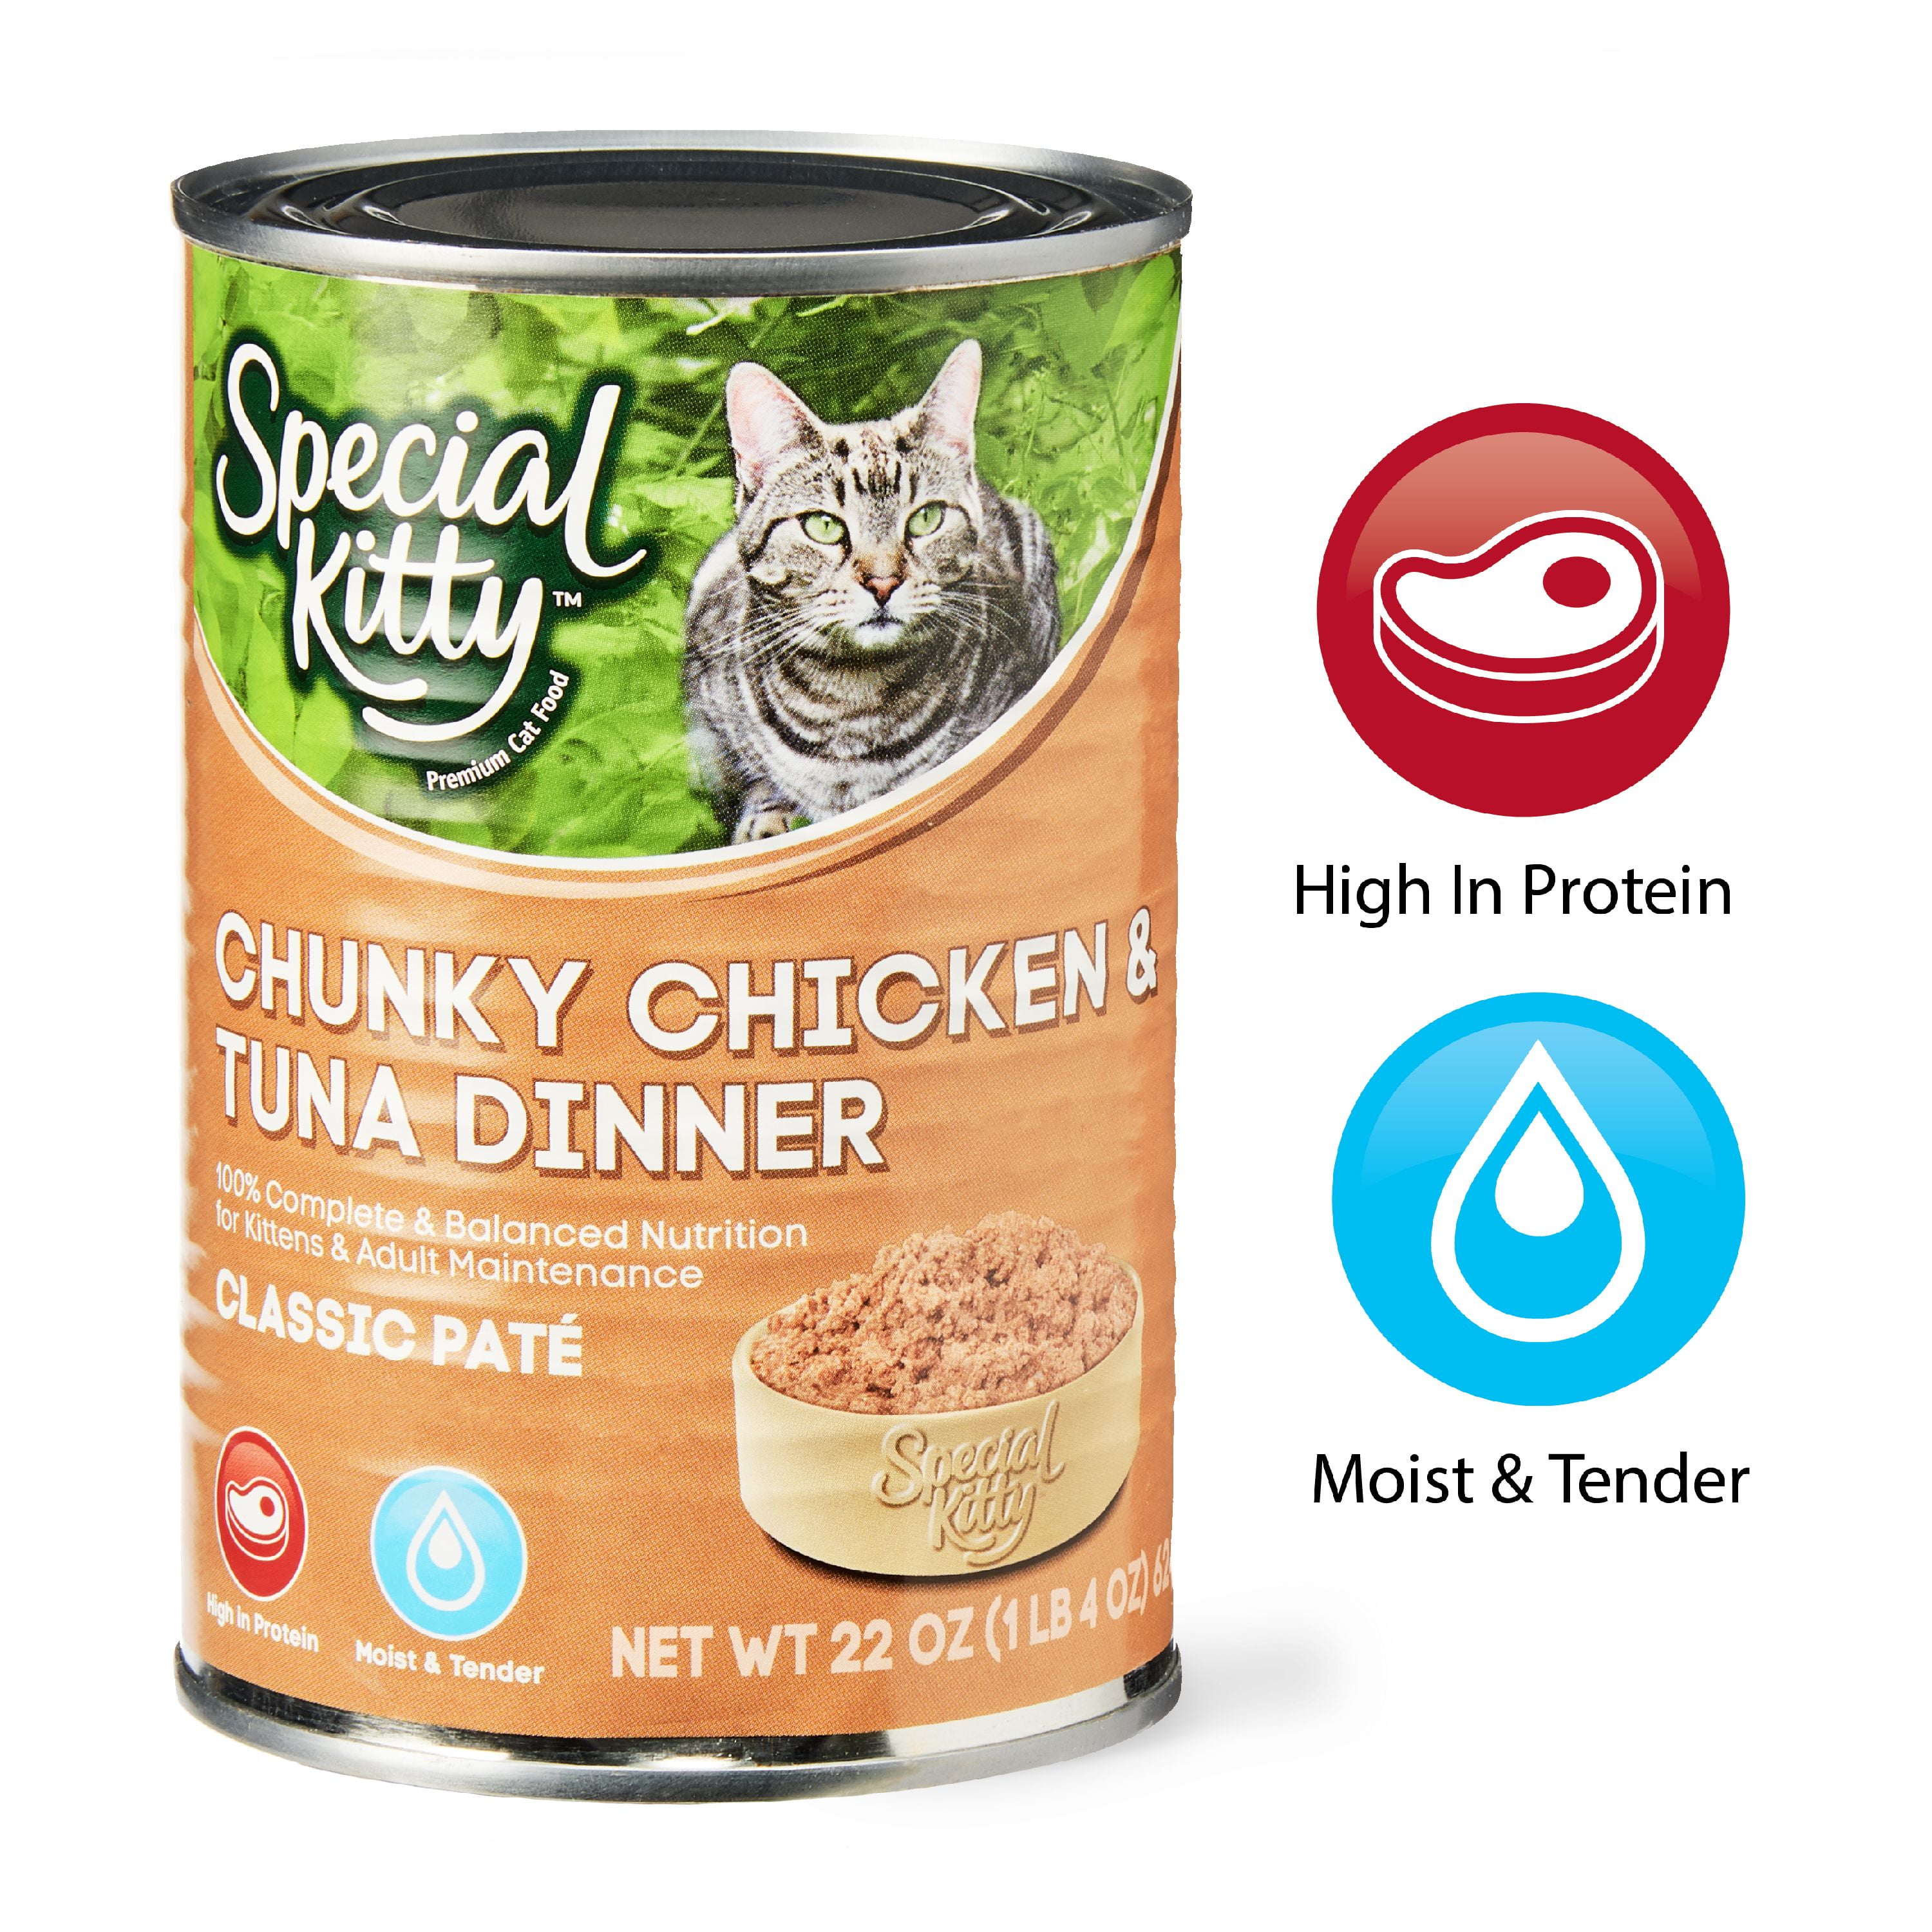 special kitty cat food at walmart